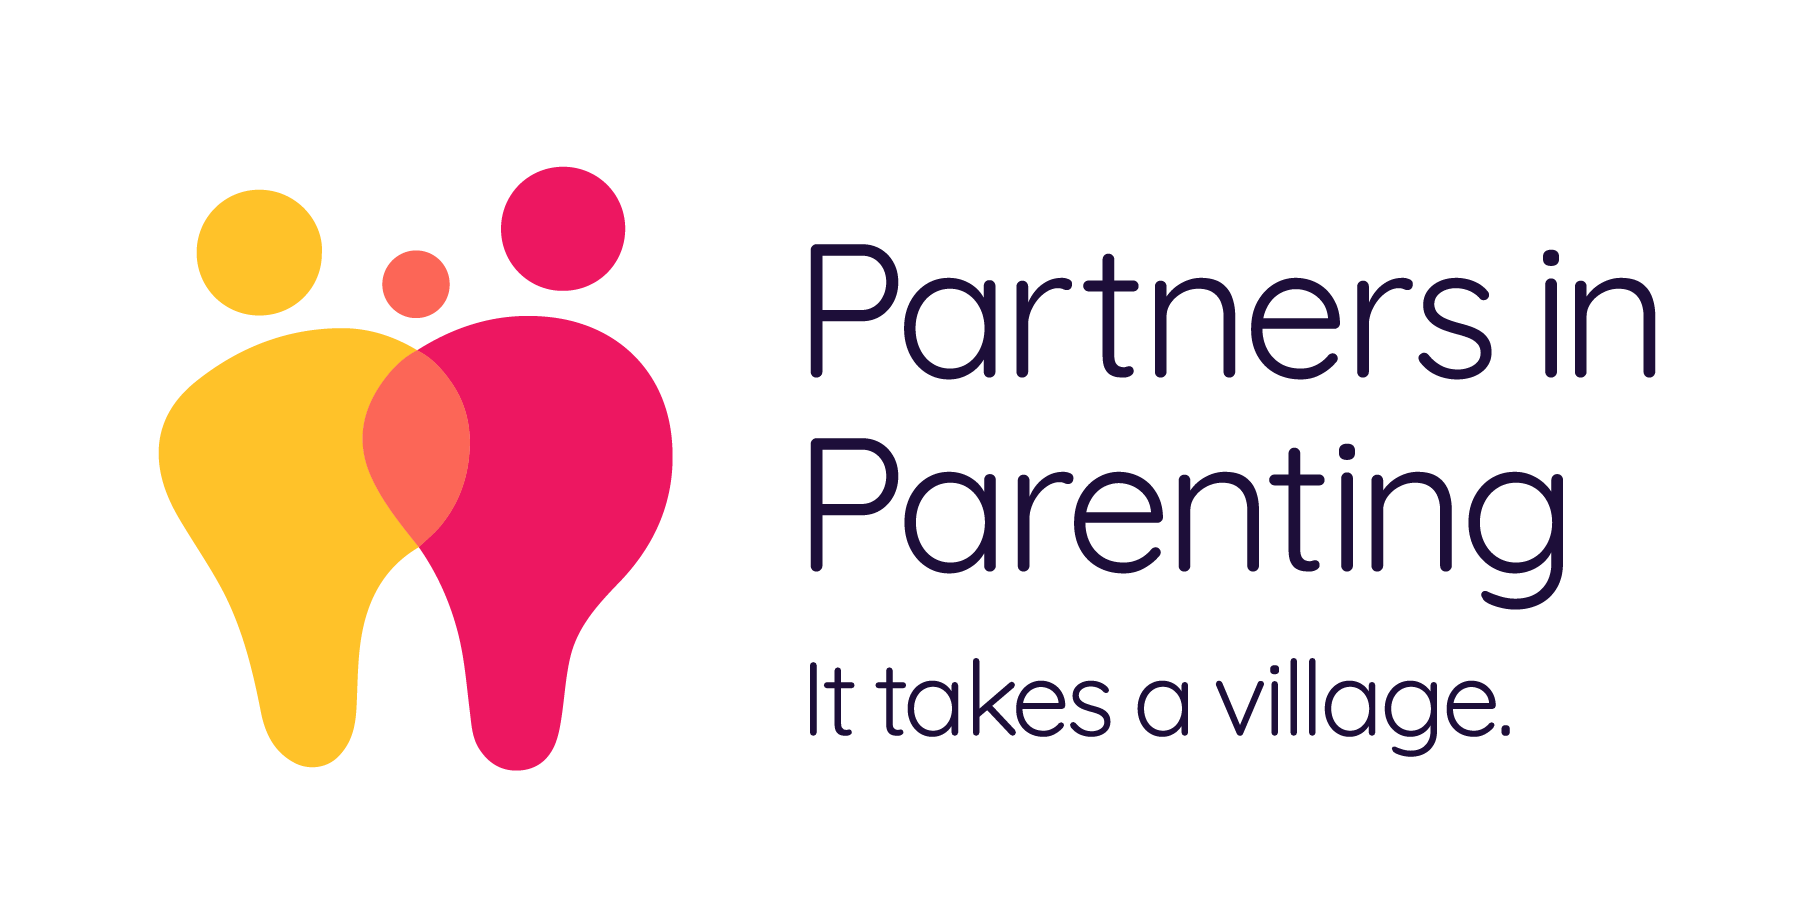 Partners in Parenting